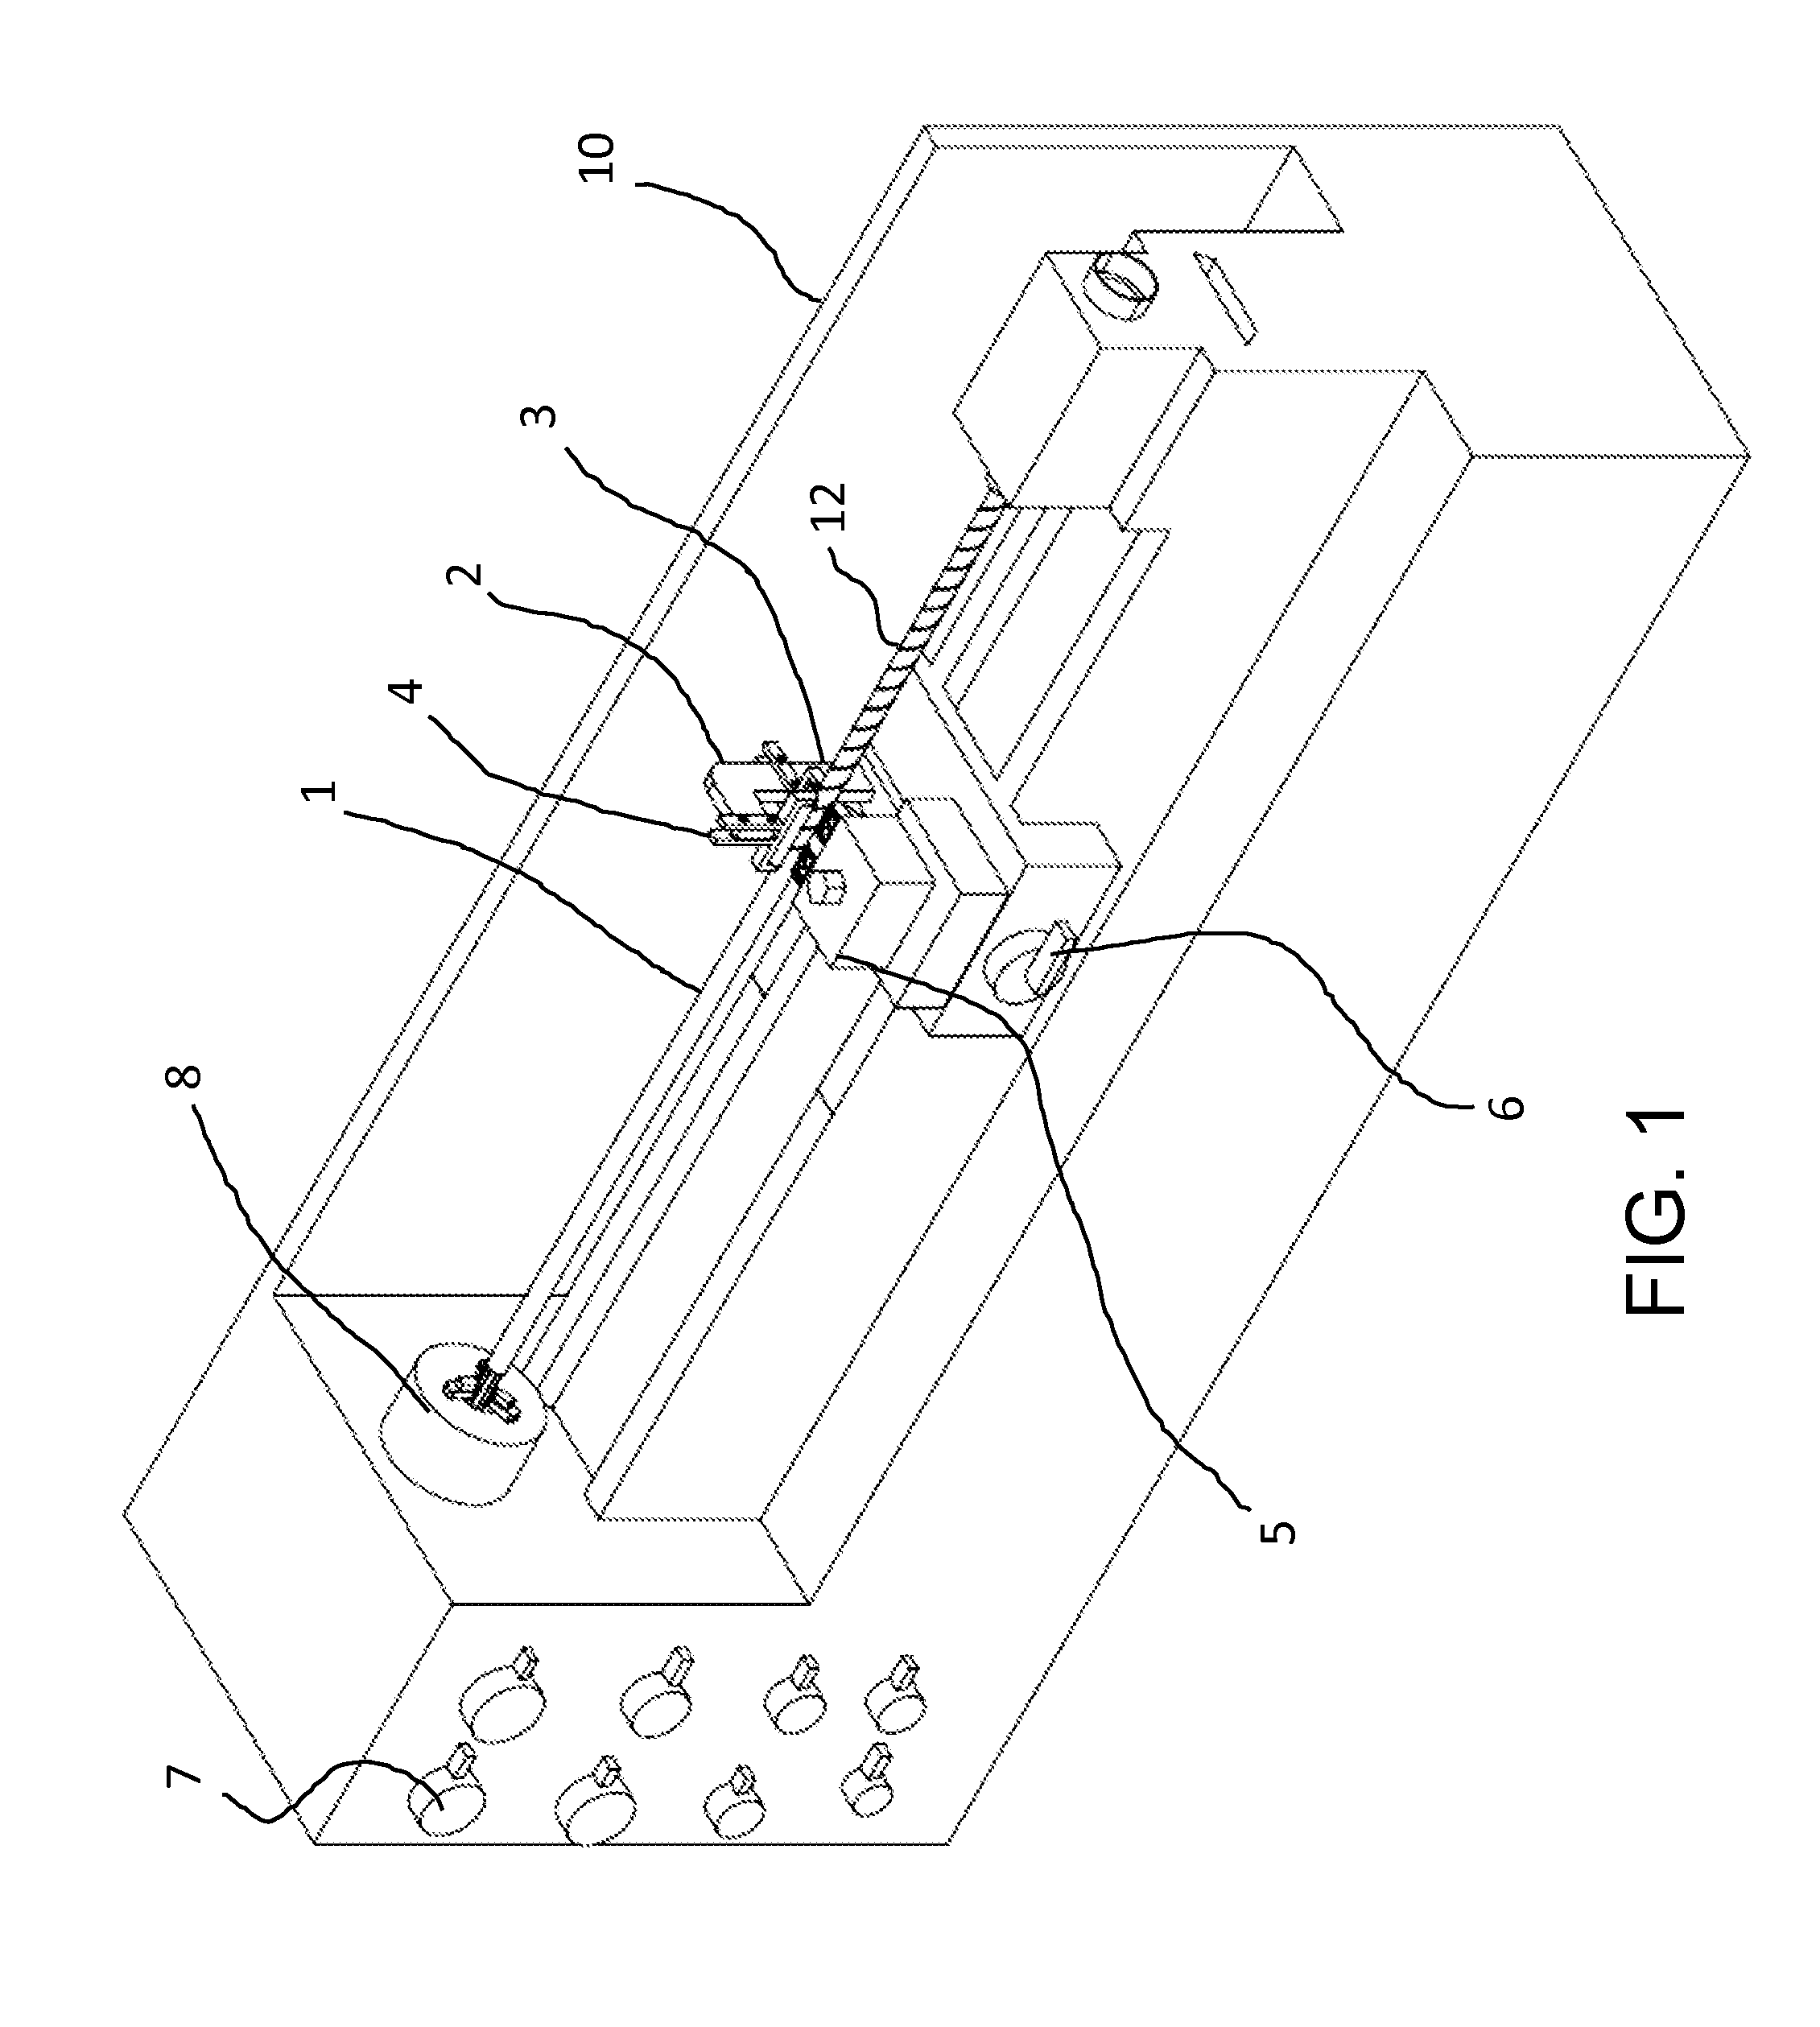 Method and apparatus for cutting one or more grooves in a cylindrical element